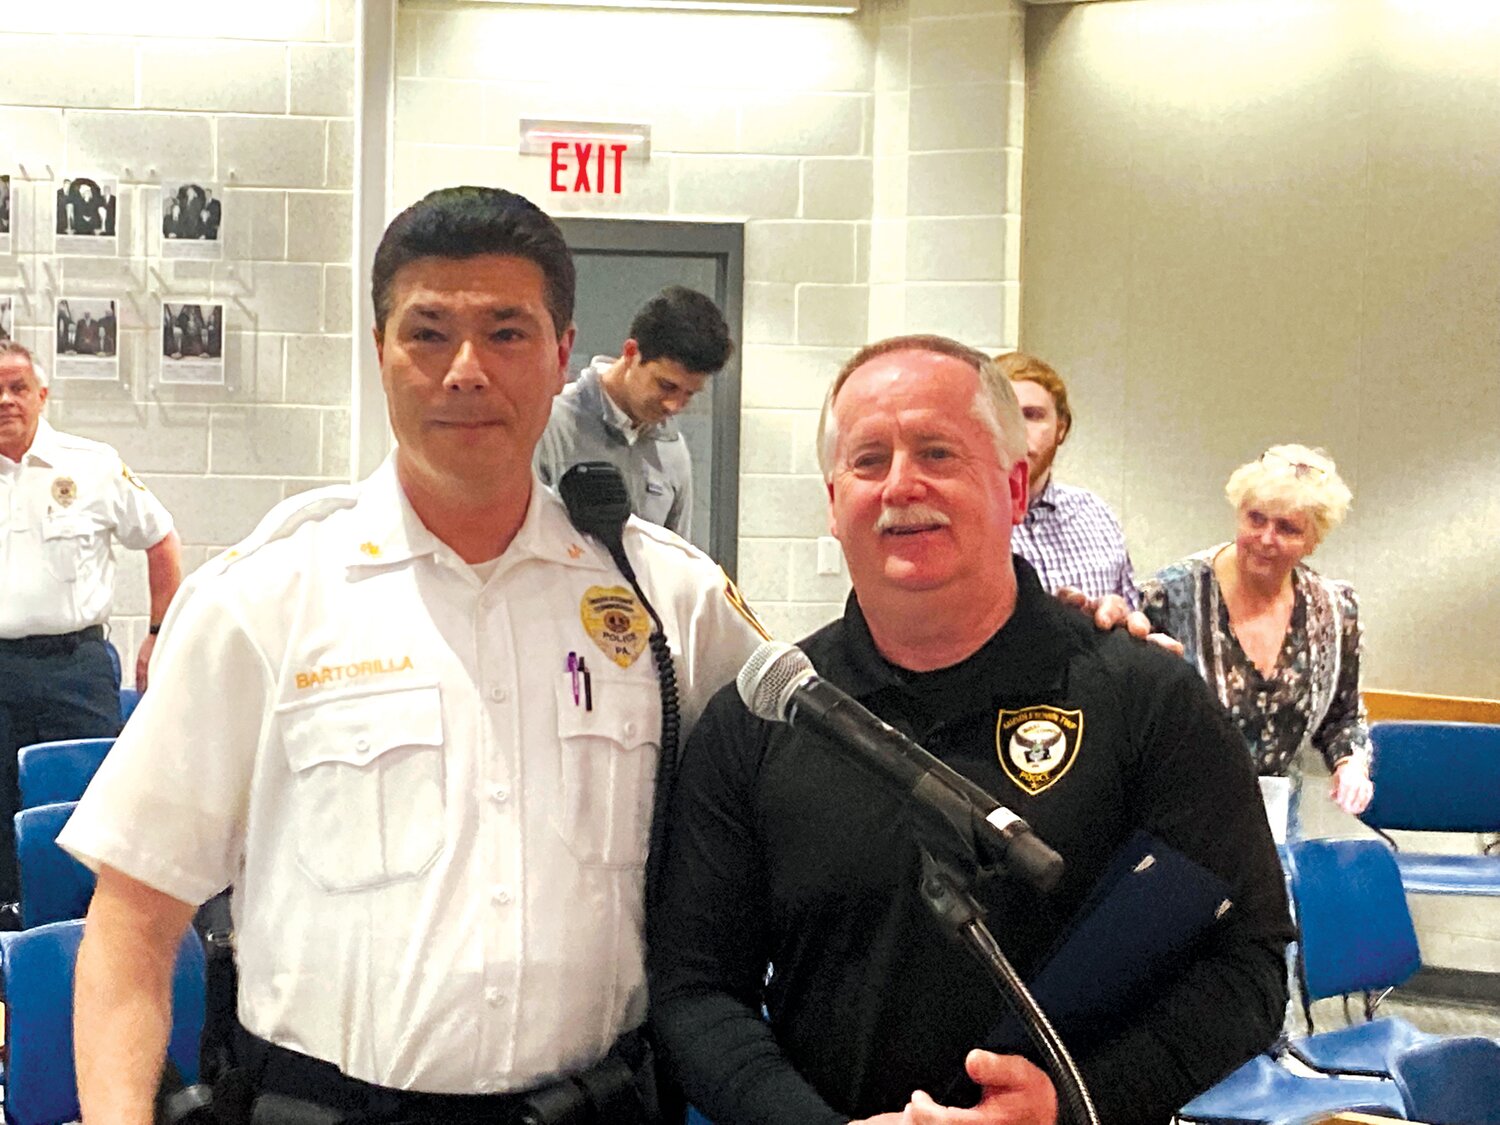 Middletown Township Police Sgt. Michael Lubold, right, is retiring and was honored April 17 for his 33 years of service. He is shown here with Chief Joseph Bartorilla.